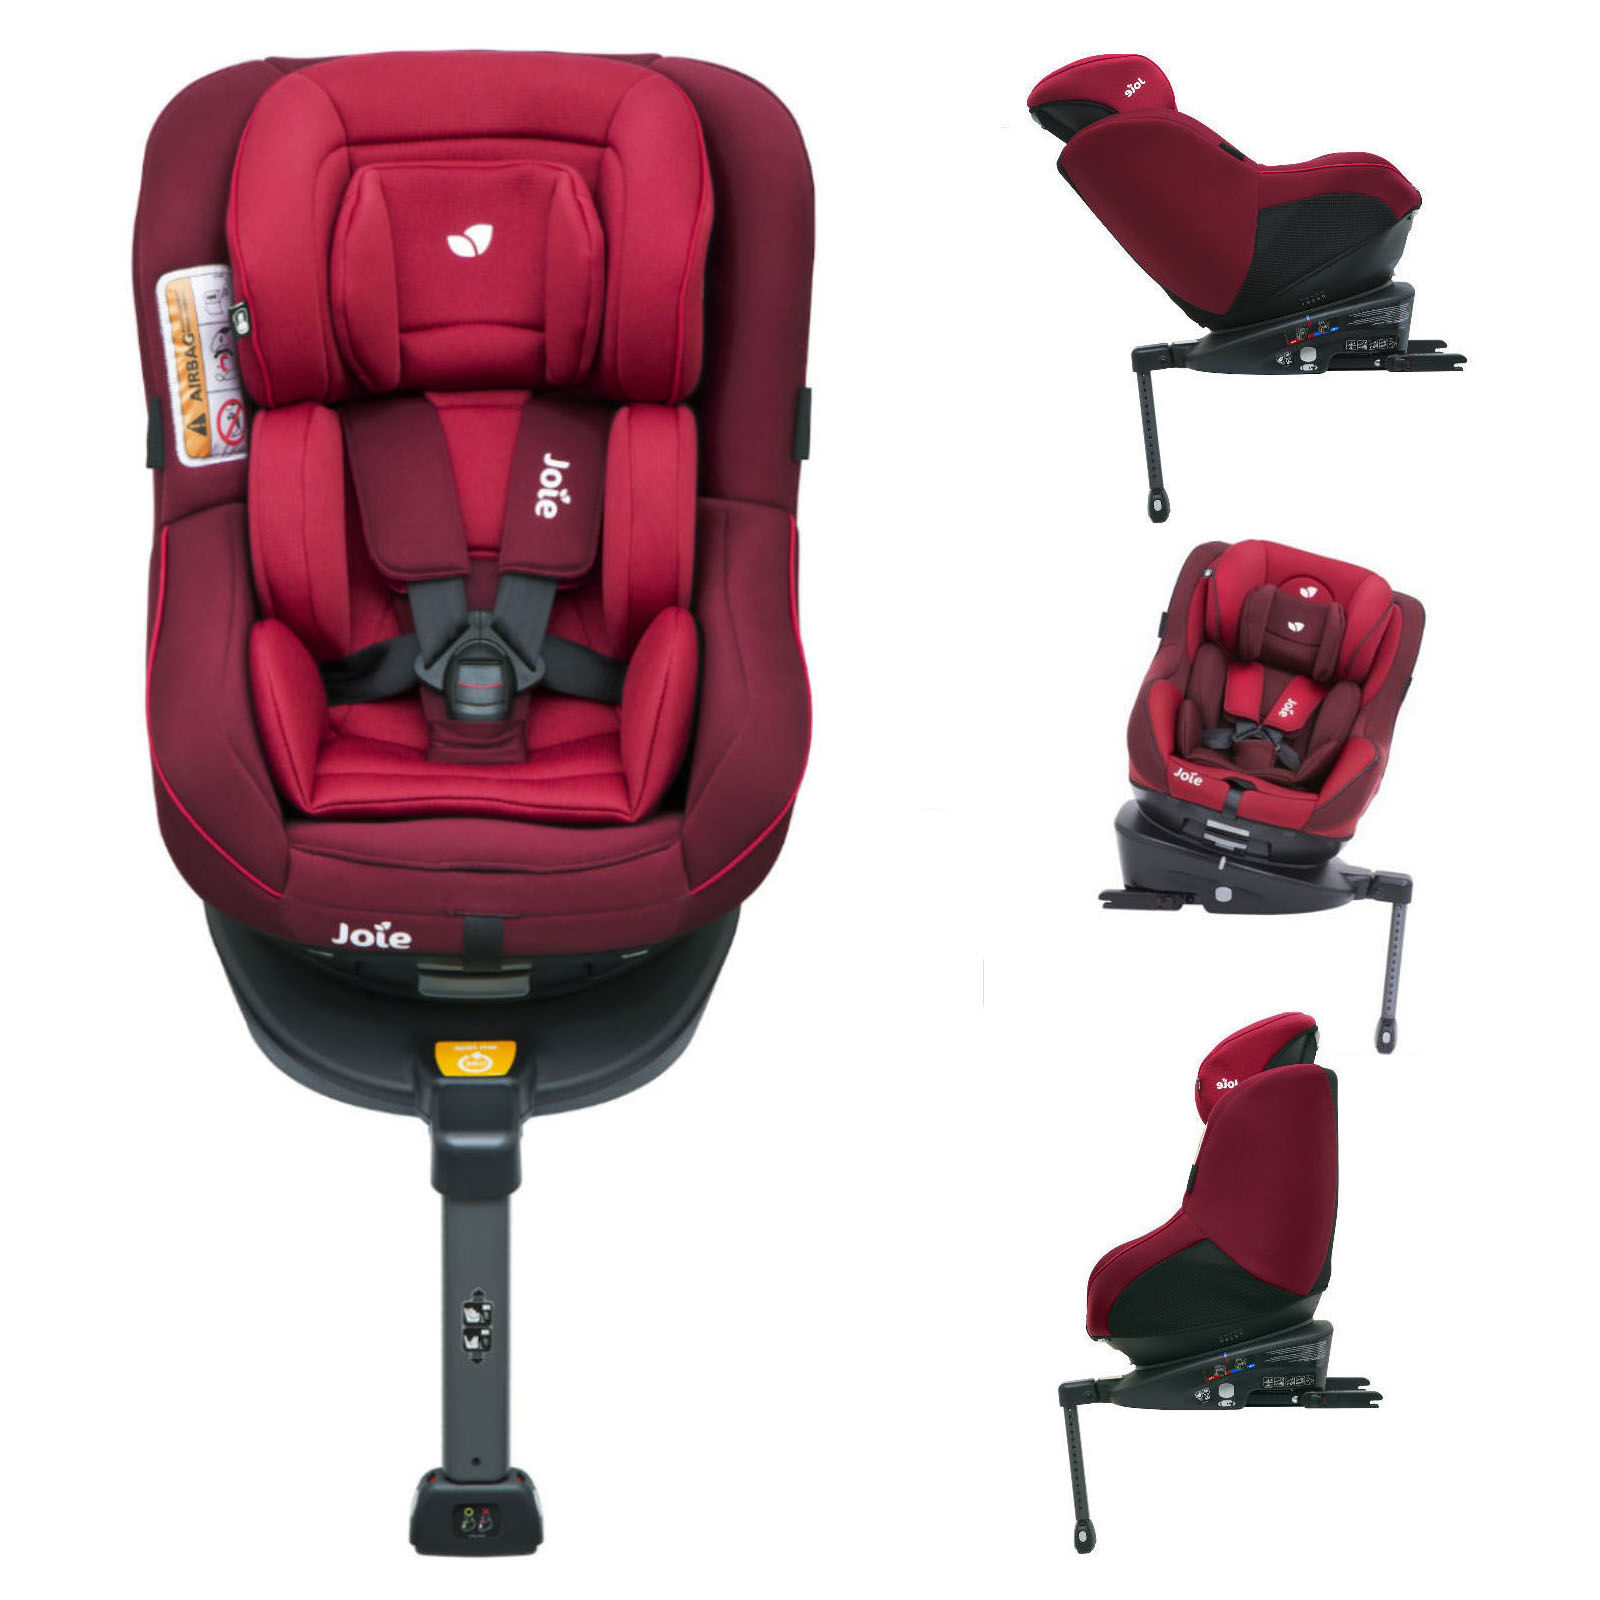 Joie Spin 360 Group 0+/1 ISOFIX Car Seat - Merlot